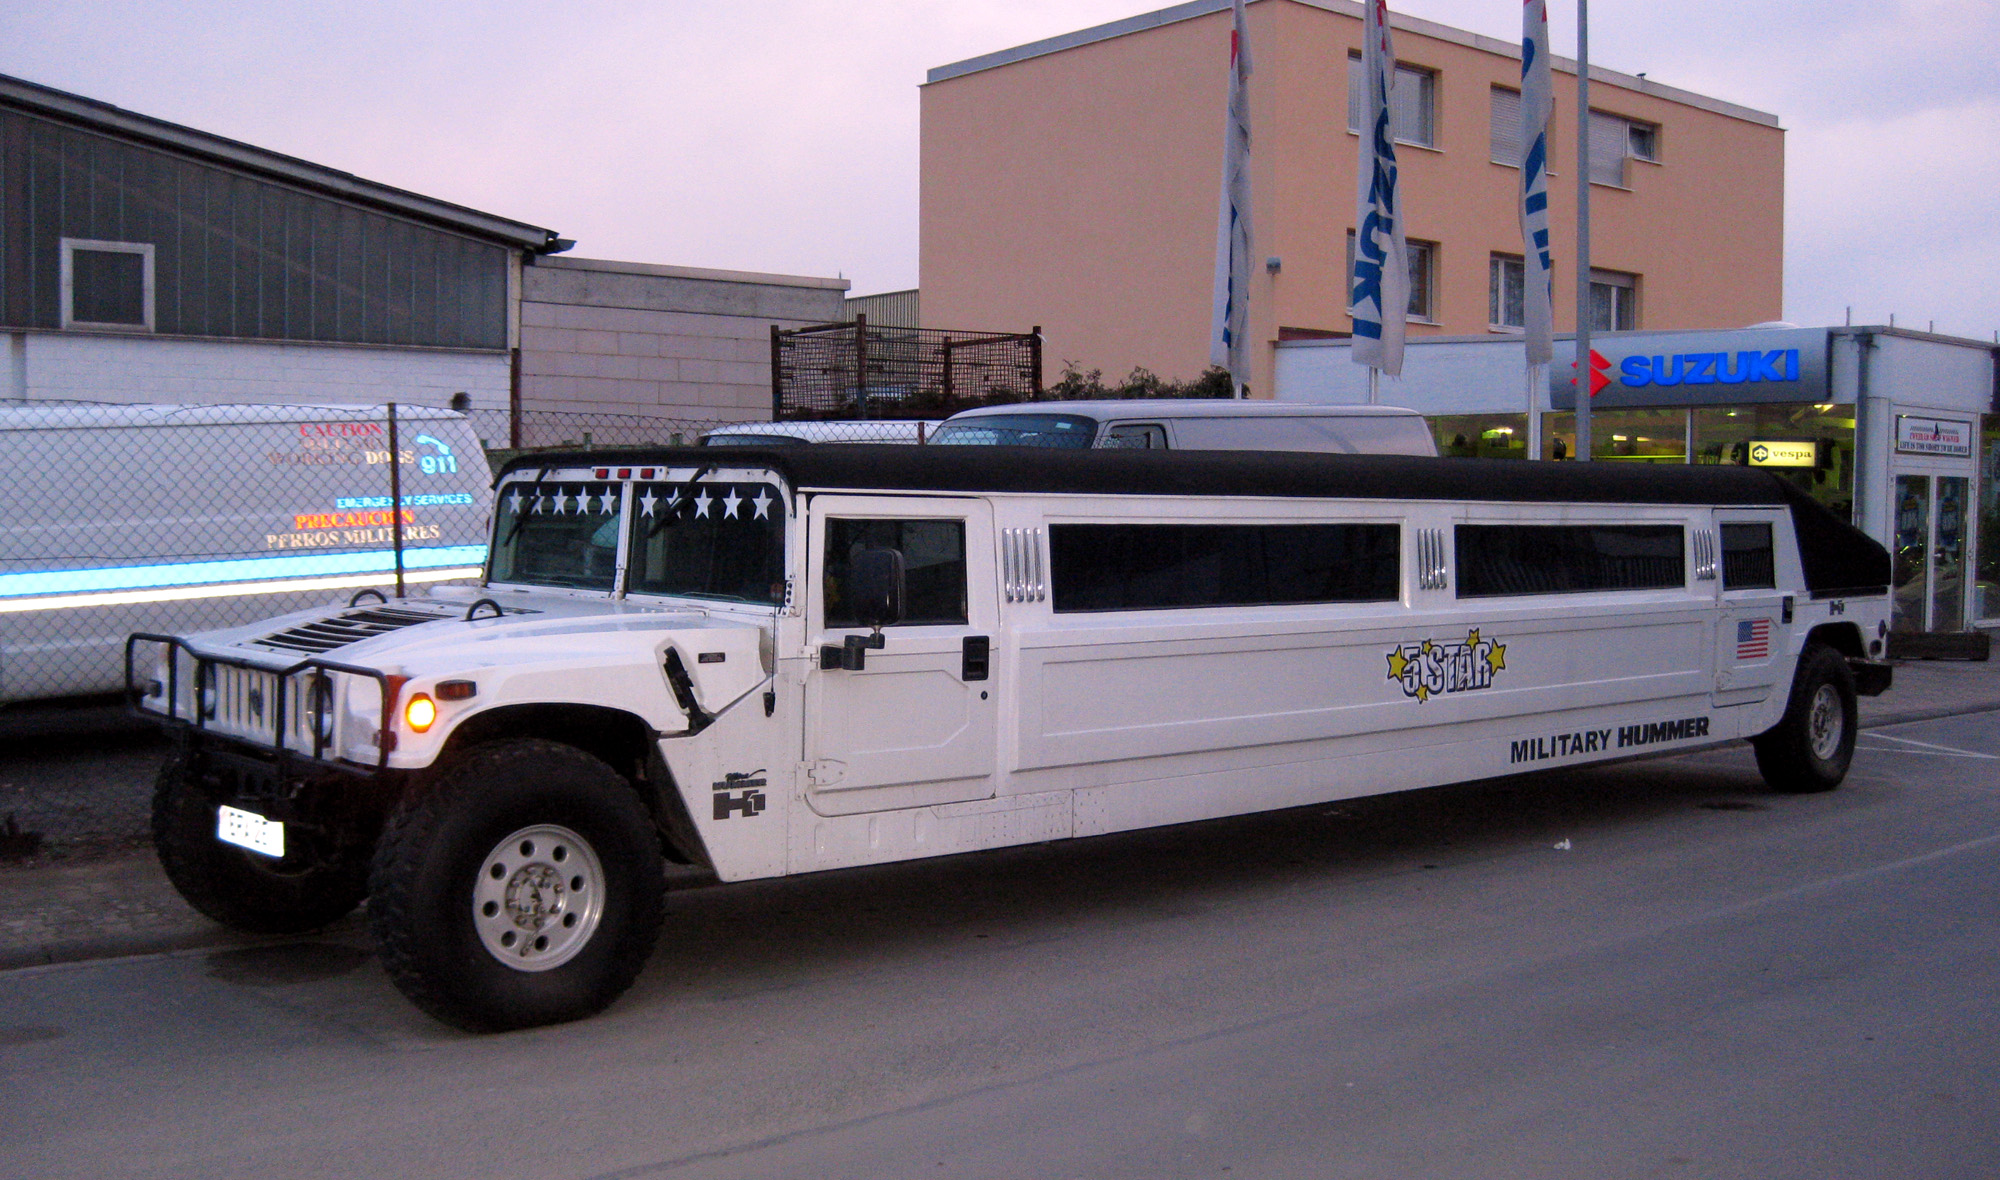 Long Hummer H1 stretch limo | Flickr - Photo Sharing!